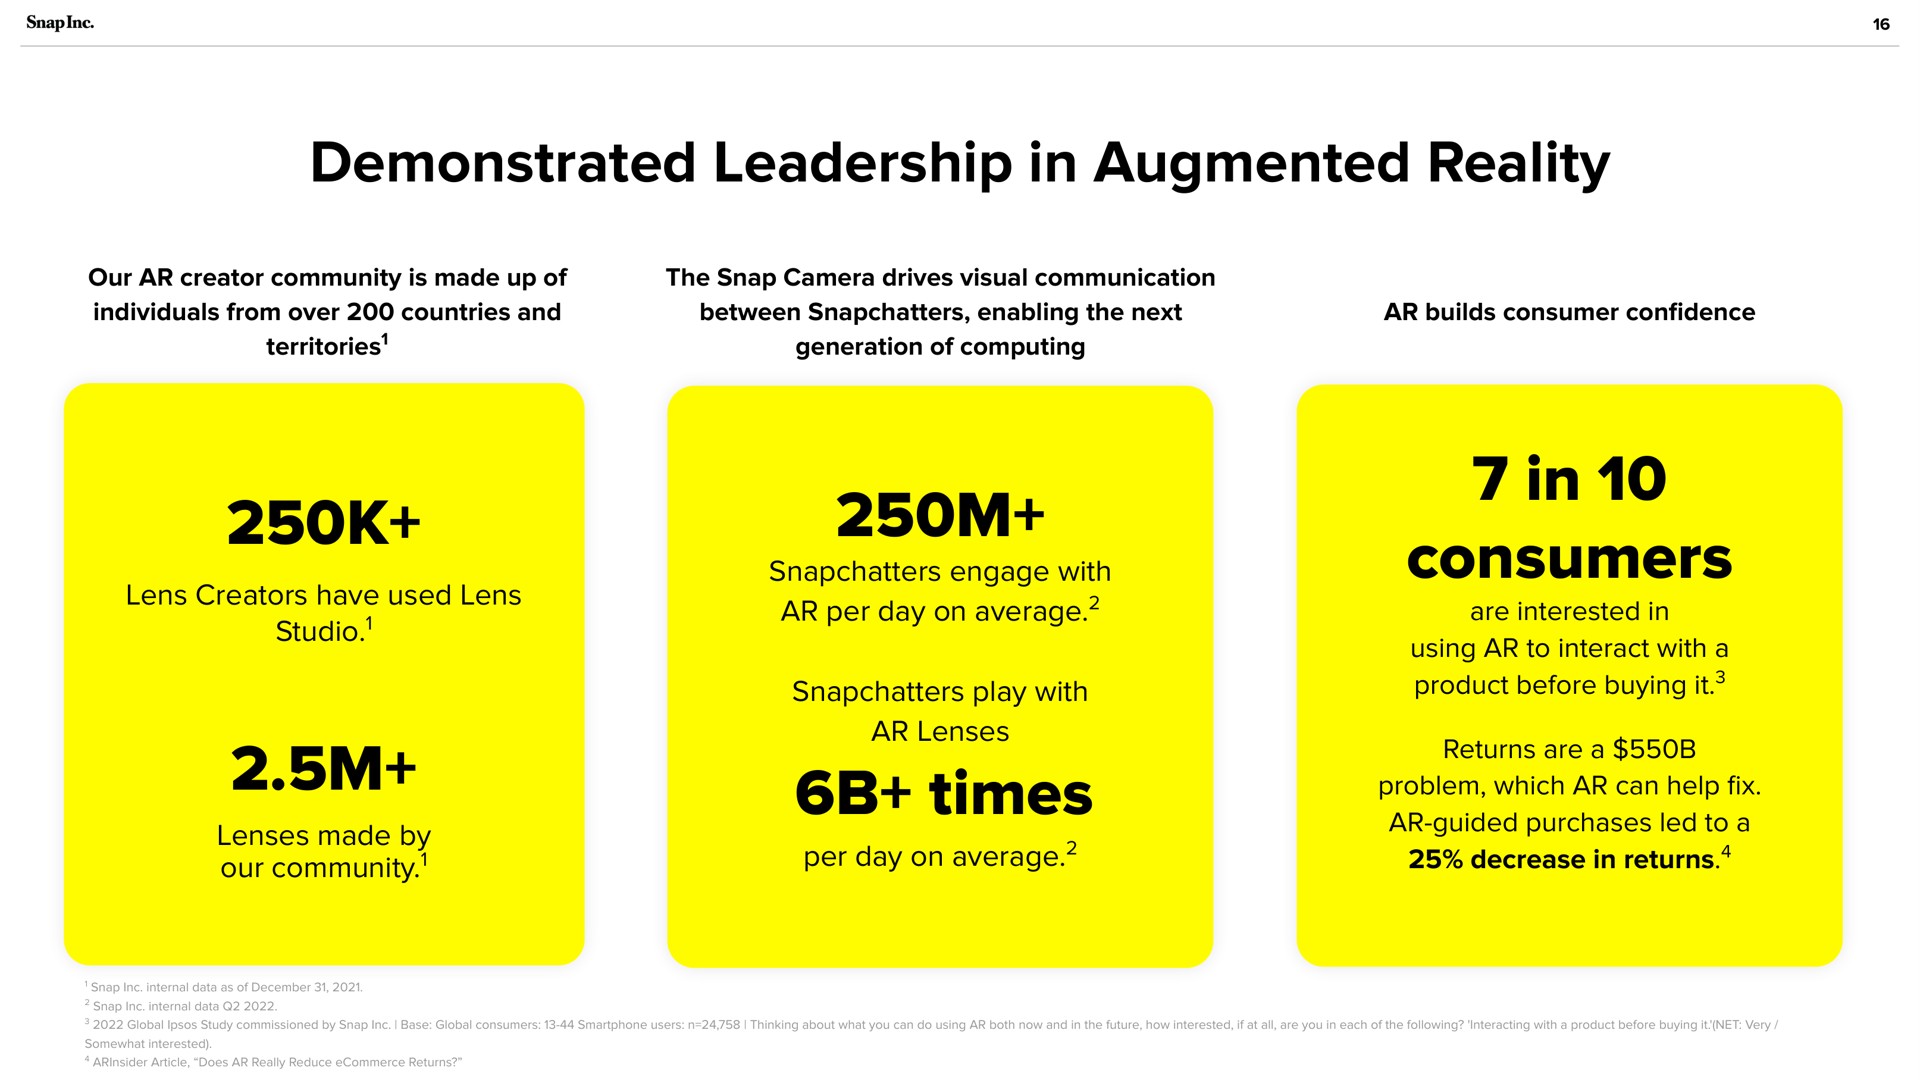 demonstrated leadership in augmented reality times in consumers | Snap Inc